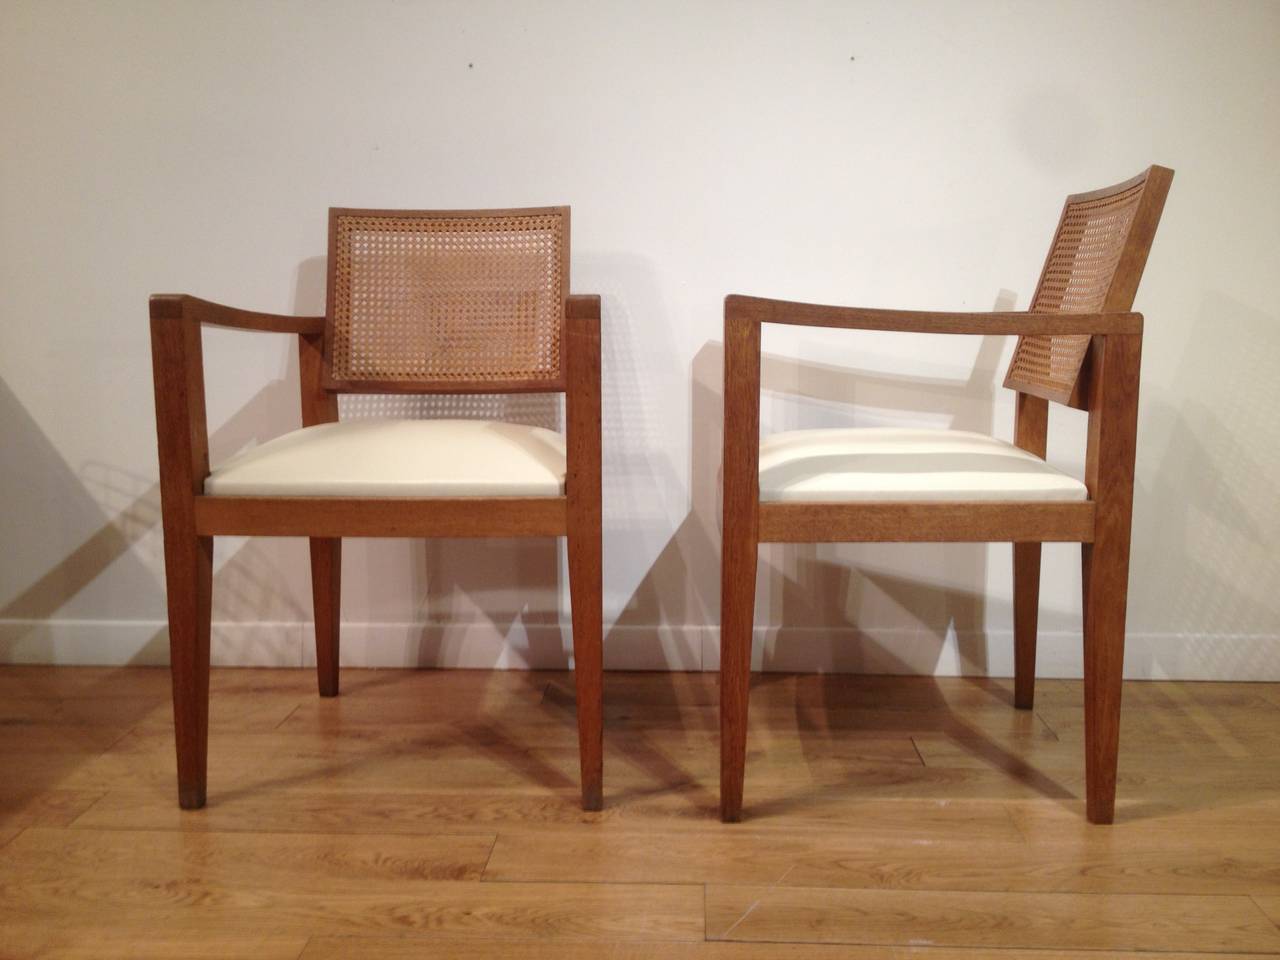 Four armchairs in oak, canework and ivory or beige leather.
Designed by Emile Seigneur in 1951.